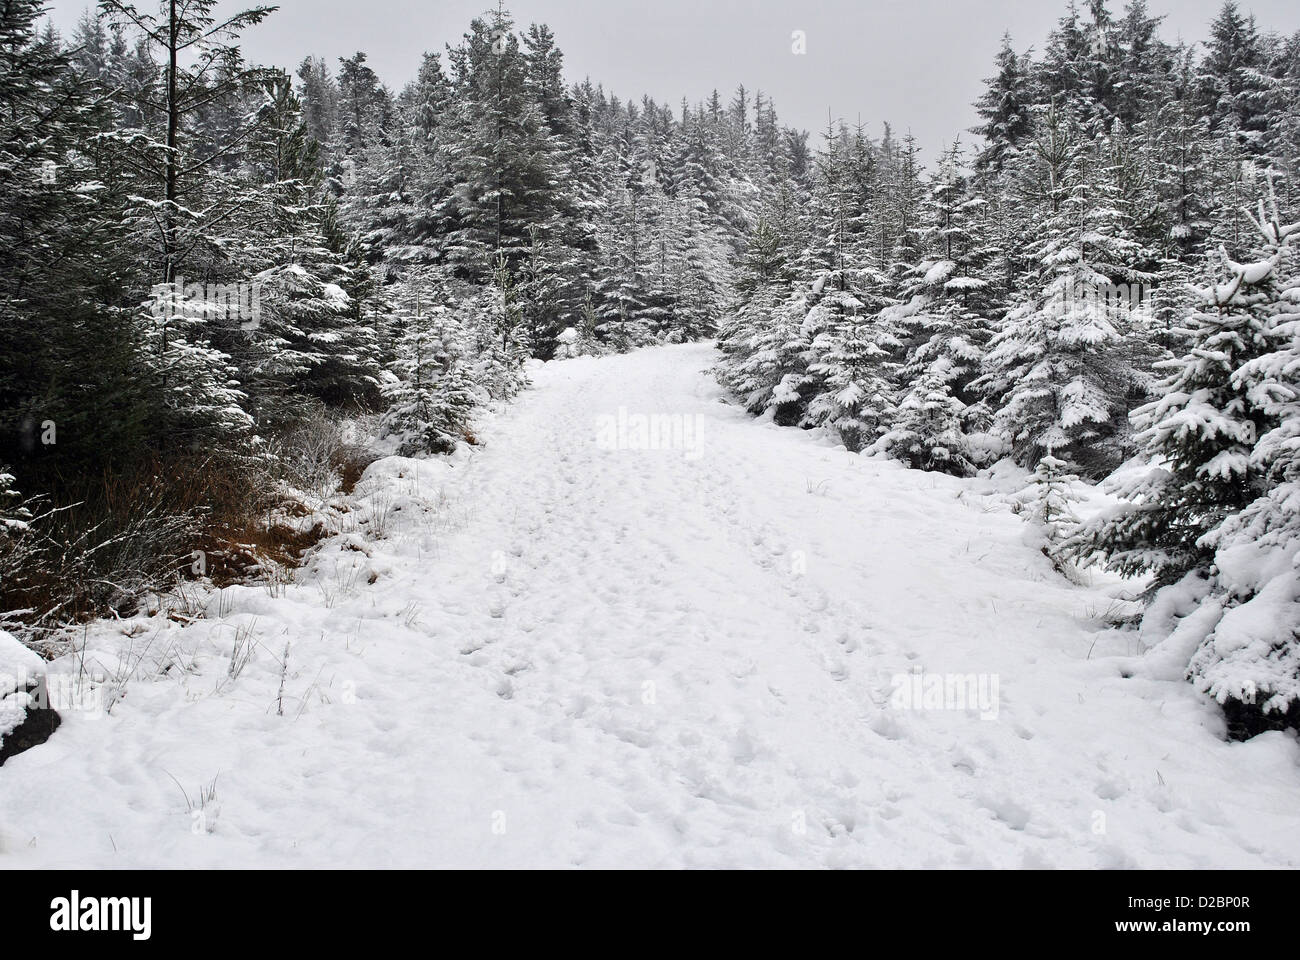 snow on a forestry walkway in wicklow ireland Stock Photo